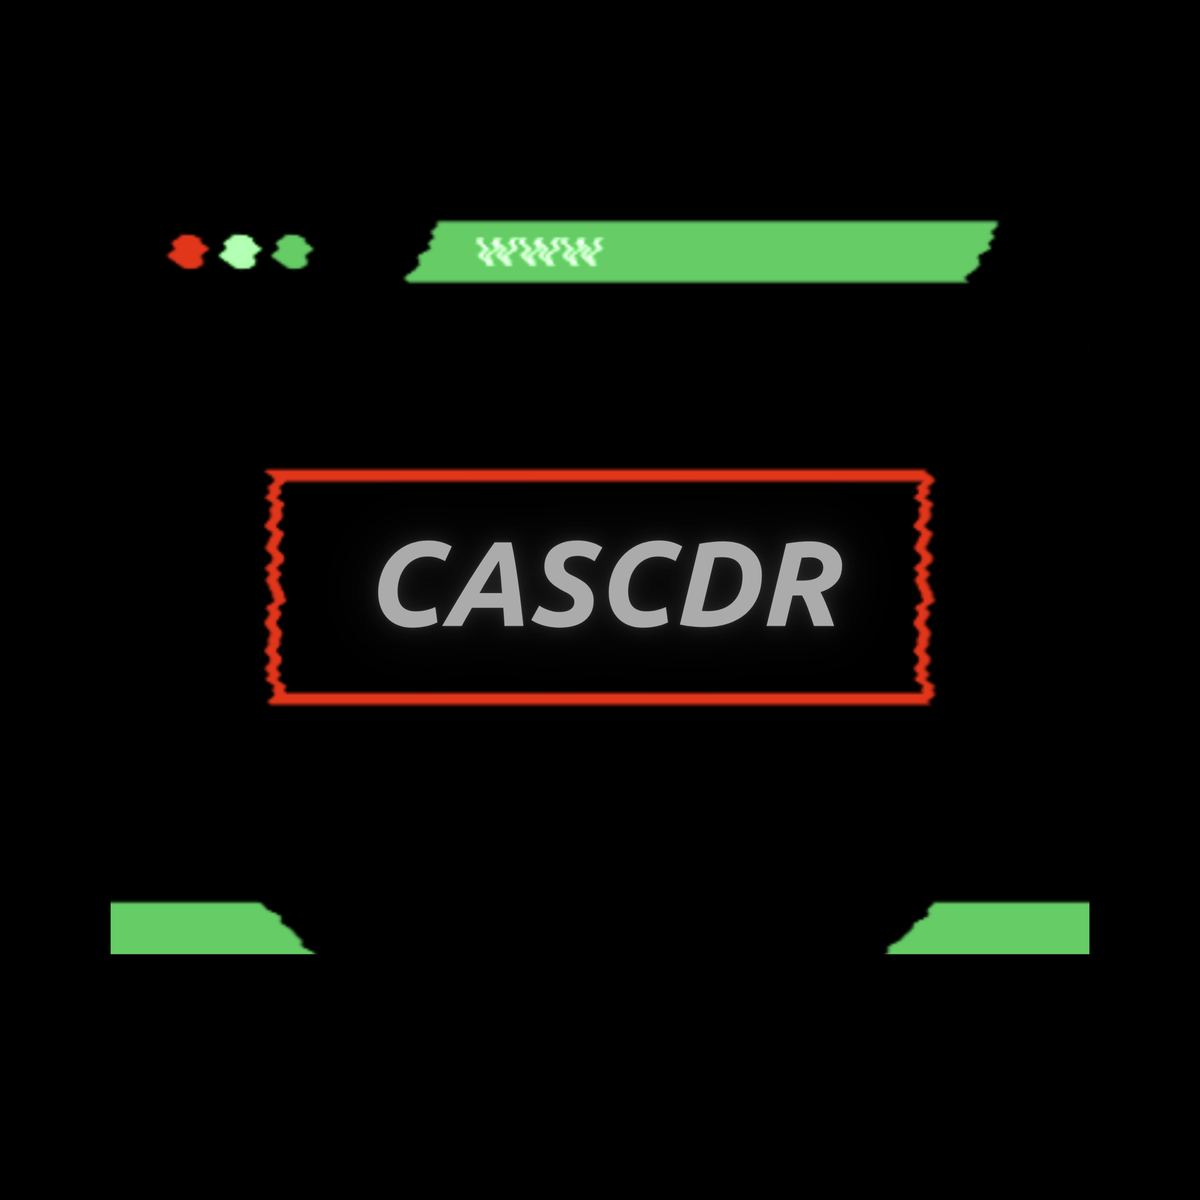 First Look at CASCDR